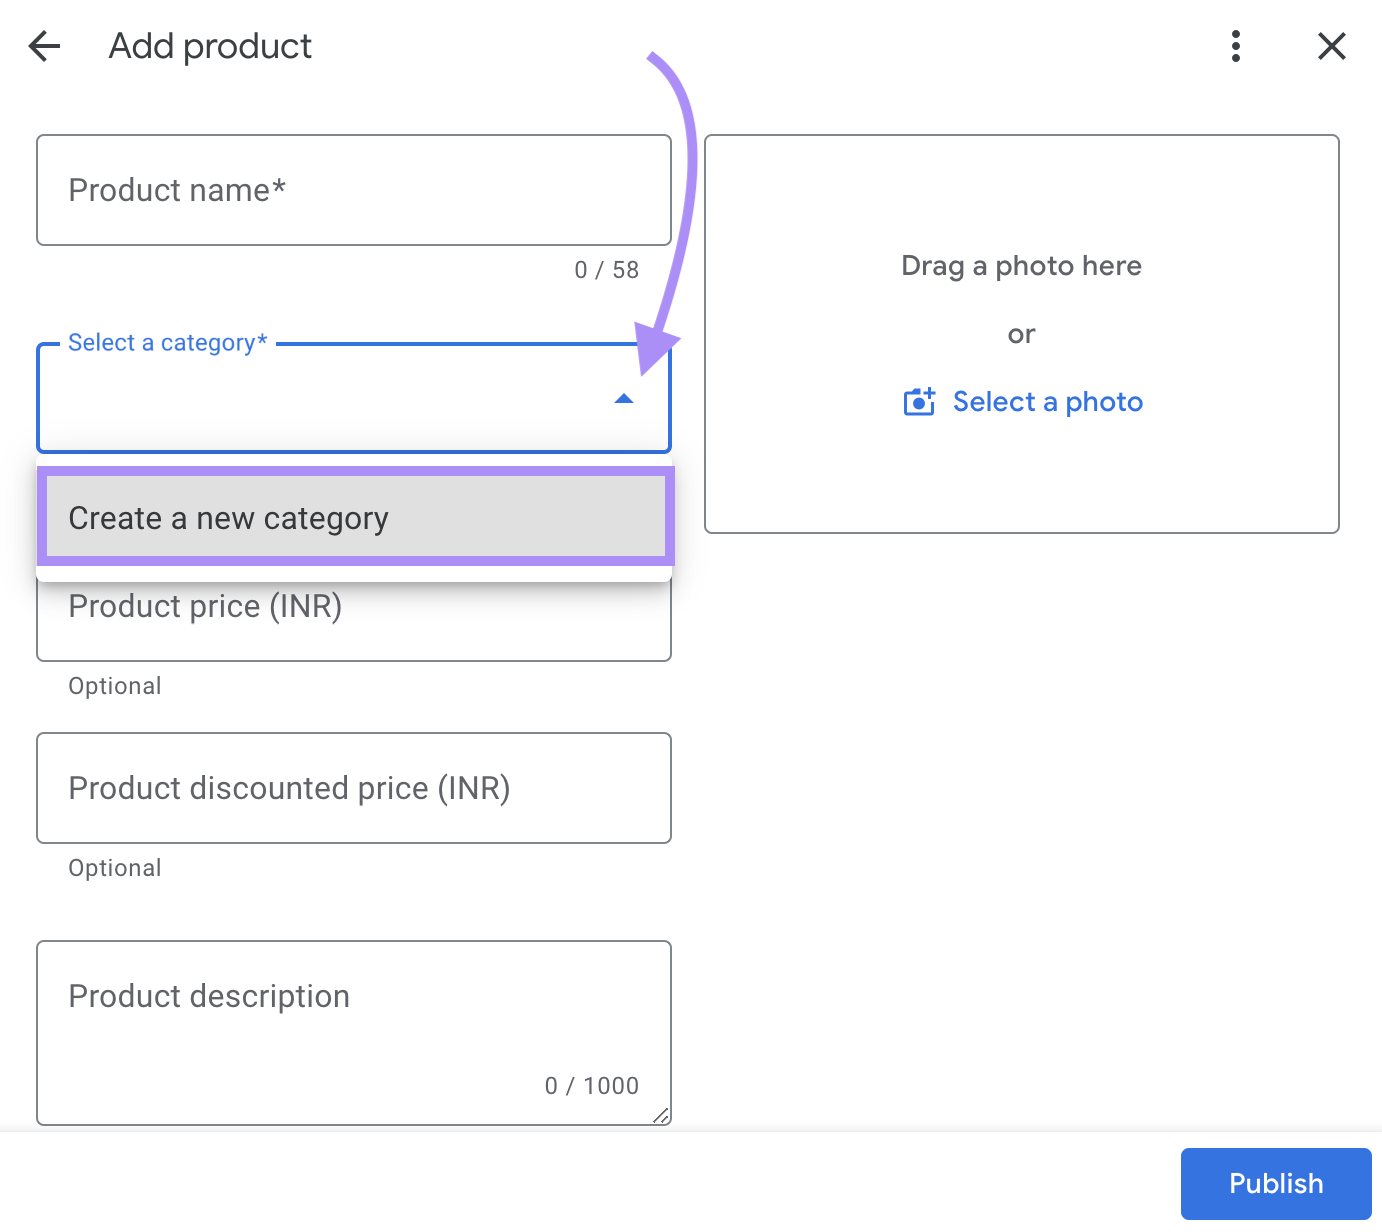 “Create a new category" option selected in the "Add product" window